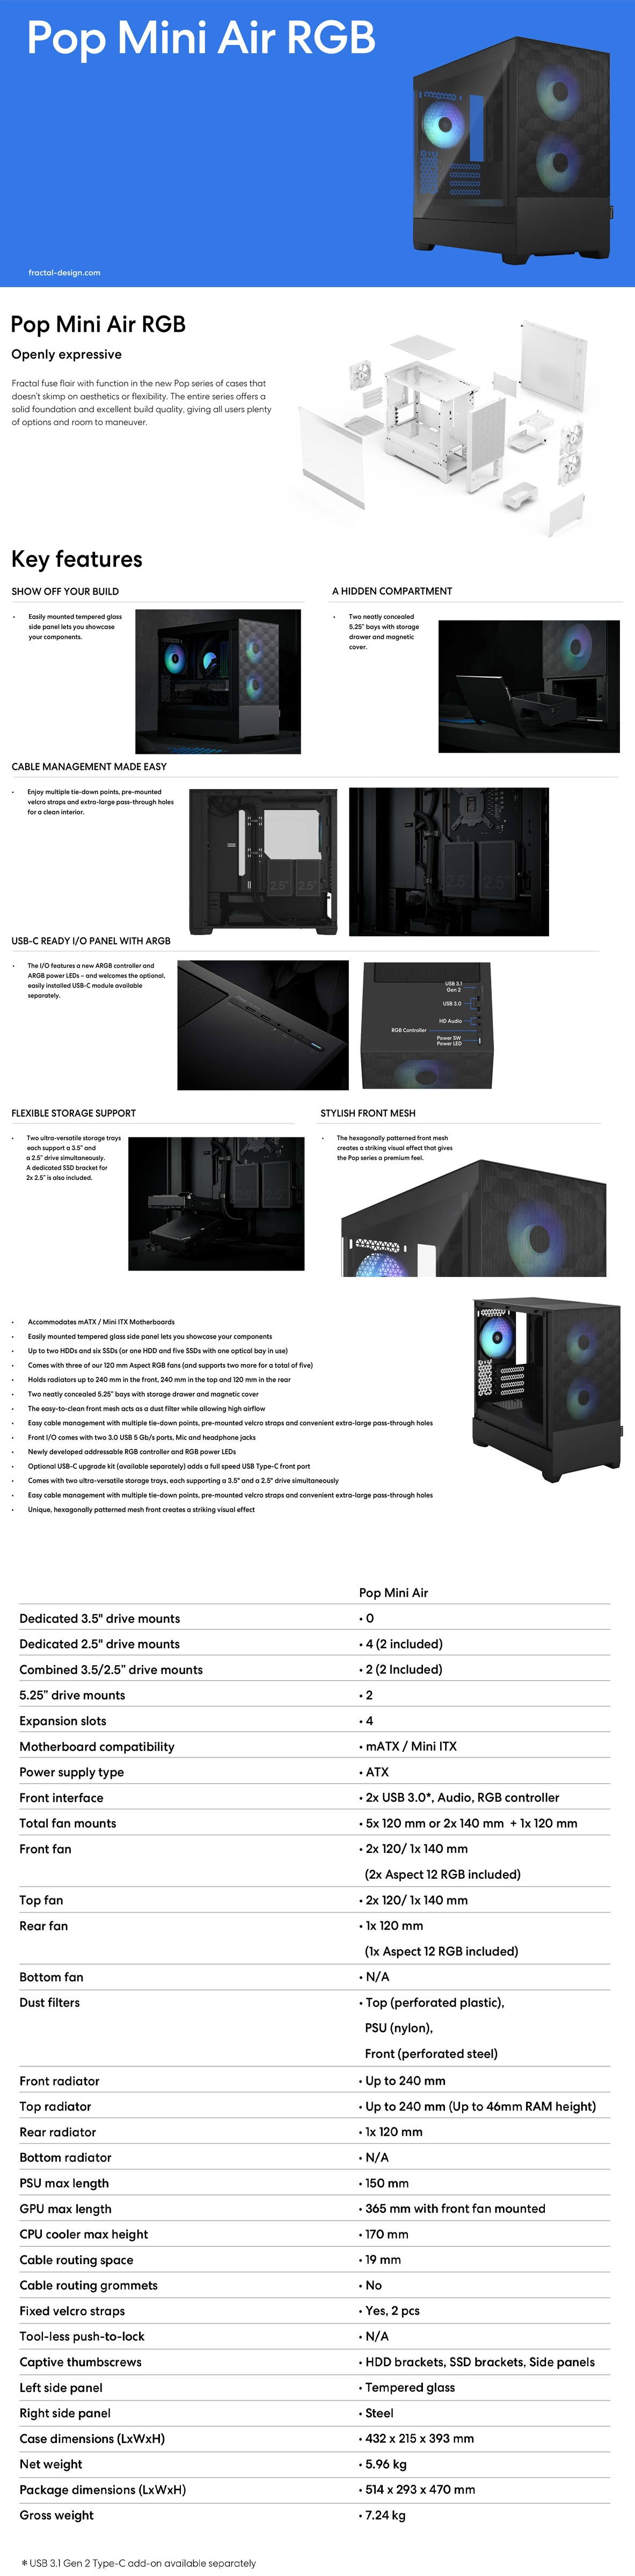 A large marketing image providing additional information about the product Fractal Design Pop Mini Air RGB TG Clear Tint Micro Tower Case - Black - Additional alt info not provided